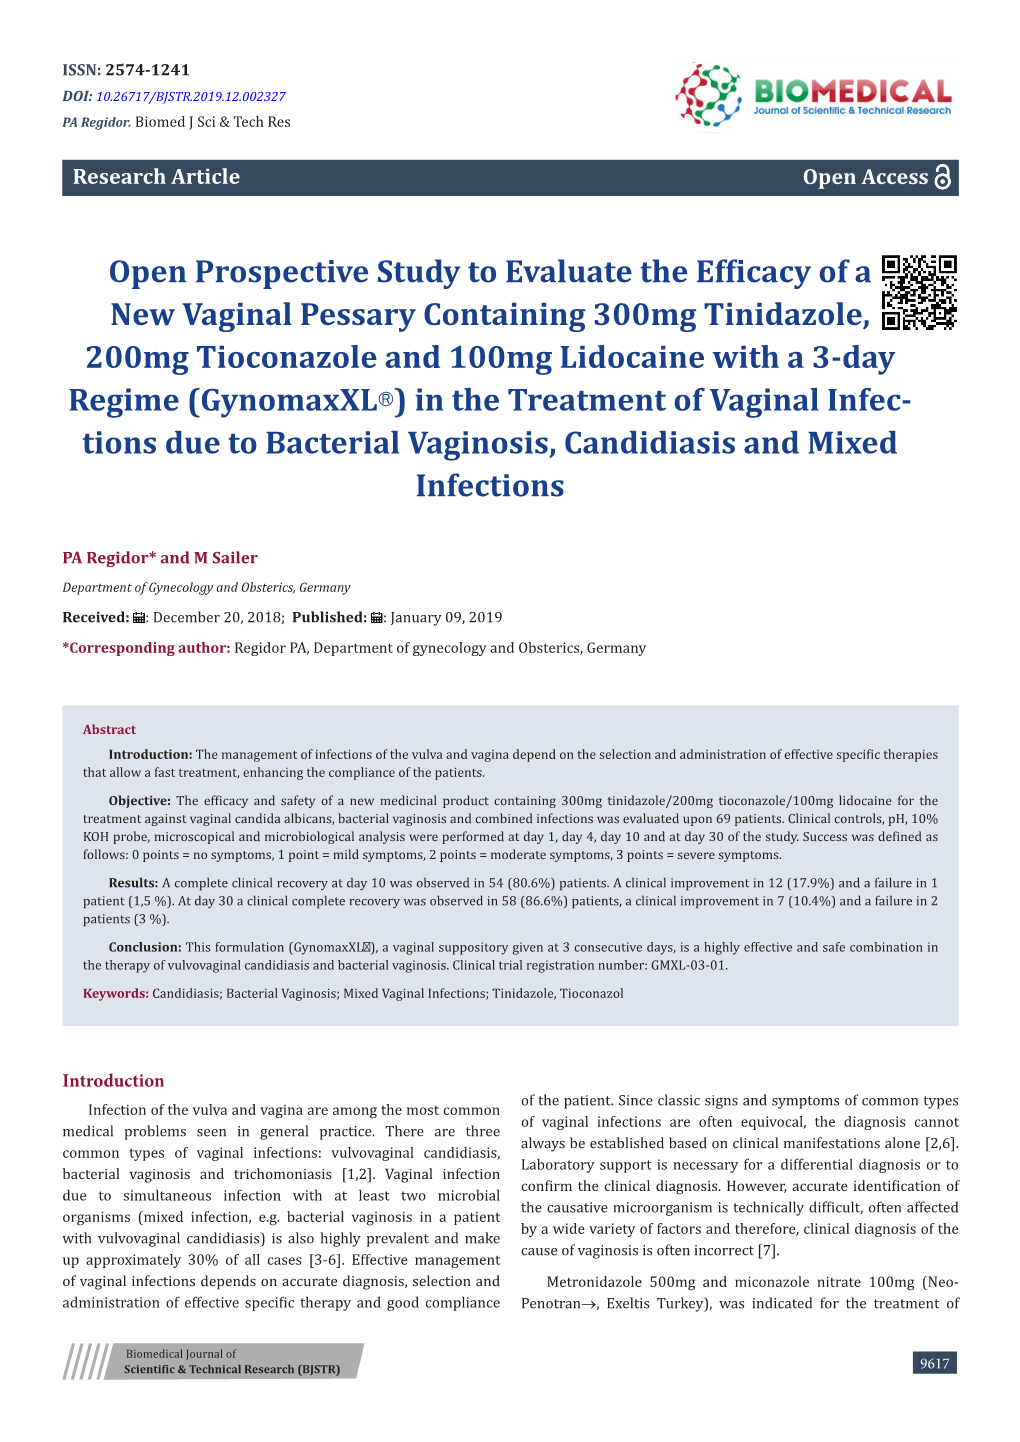 Open Prospective Study to Evaluate the Efficacy of a New Vaginal Pessary Containing 300Mg Tinidazole, 200Mg Tioconazole and 100M